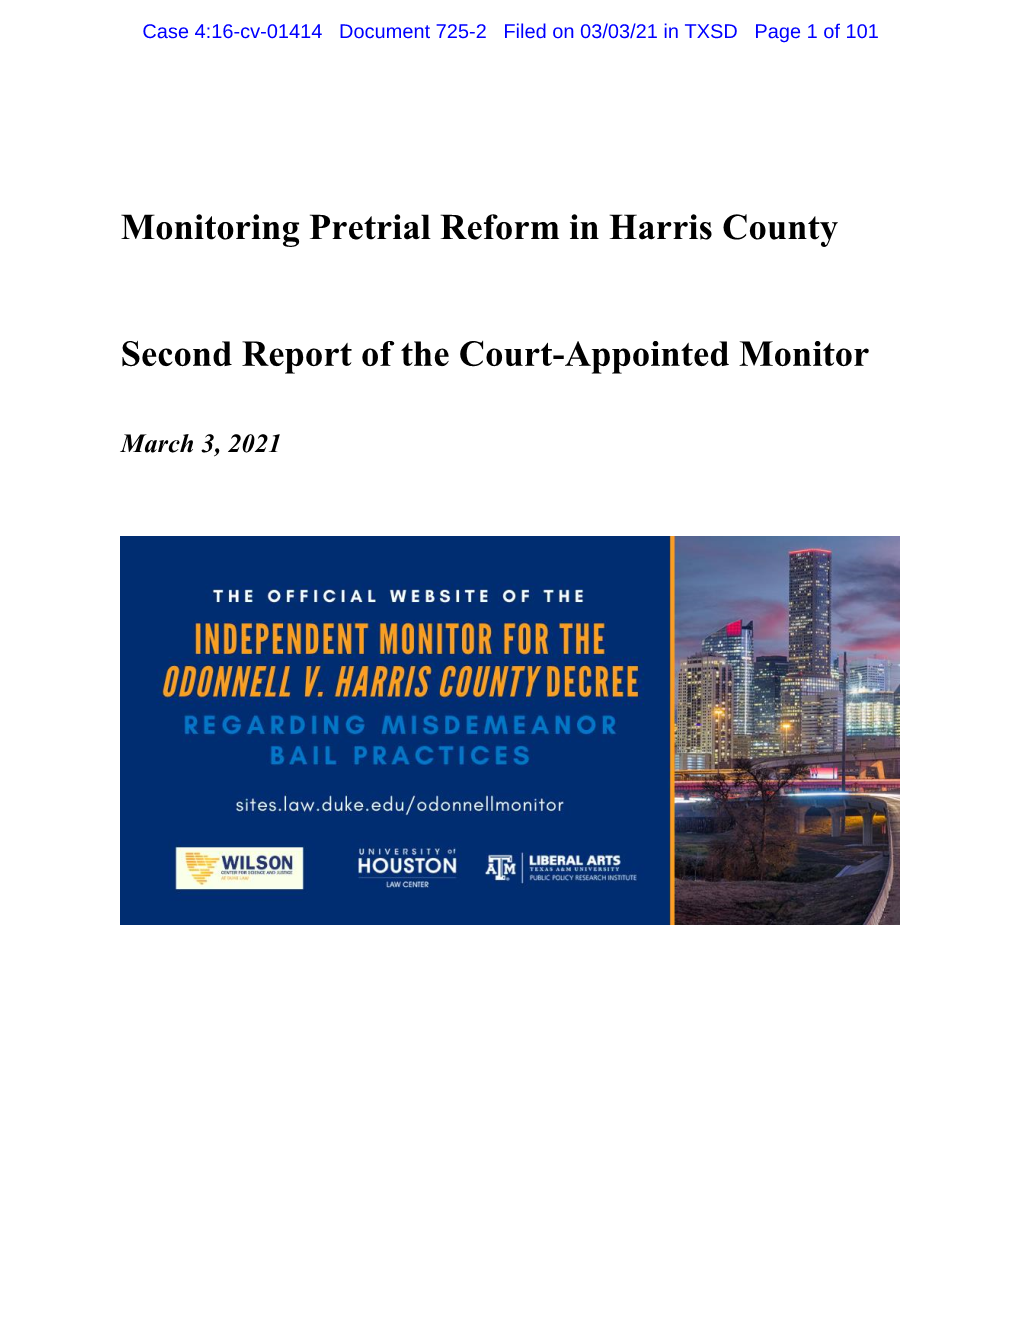 Monitoring Pretrial Reform in Harris County Second Report of the Court